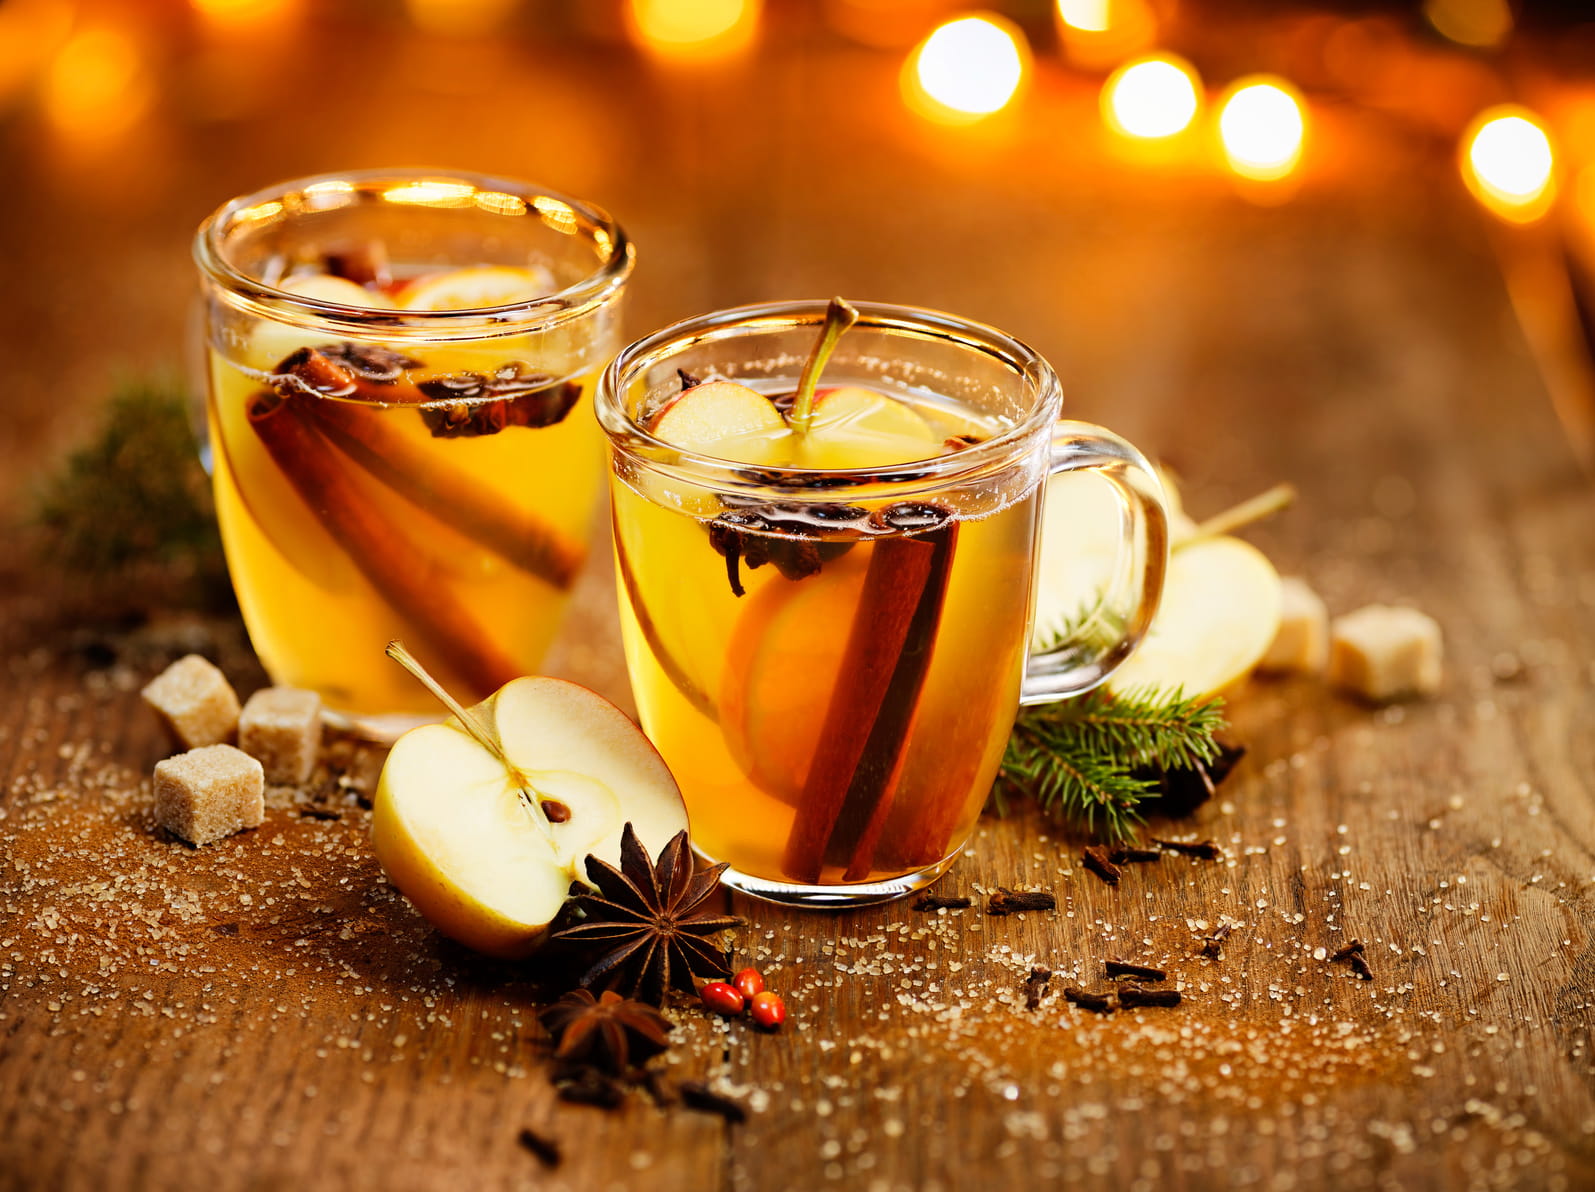 How to celebrate wassail at home